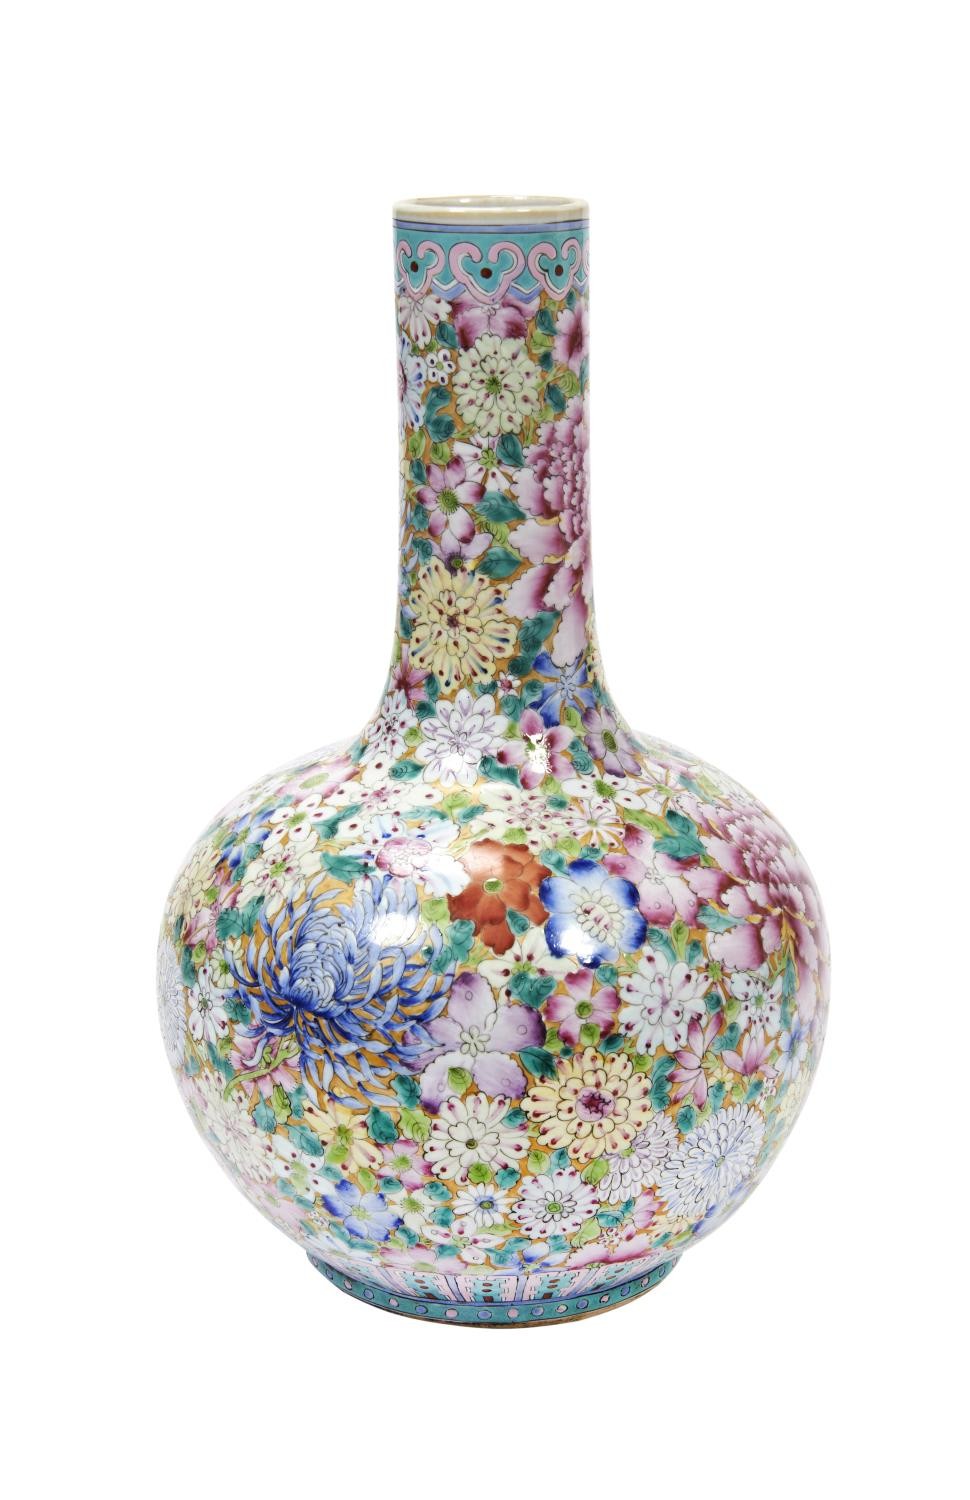 LARGE MILLEFLEUR BOTTLE VASE GUANGXU PERIOD the sides painted with a profusion of brightly coloured 